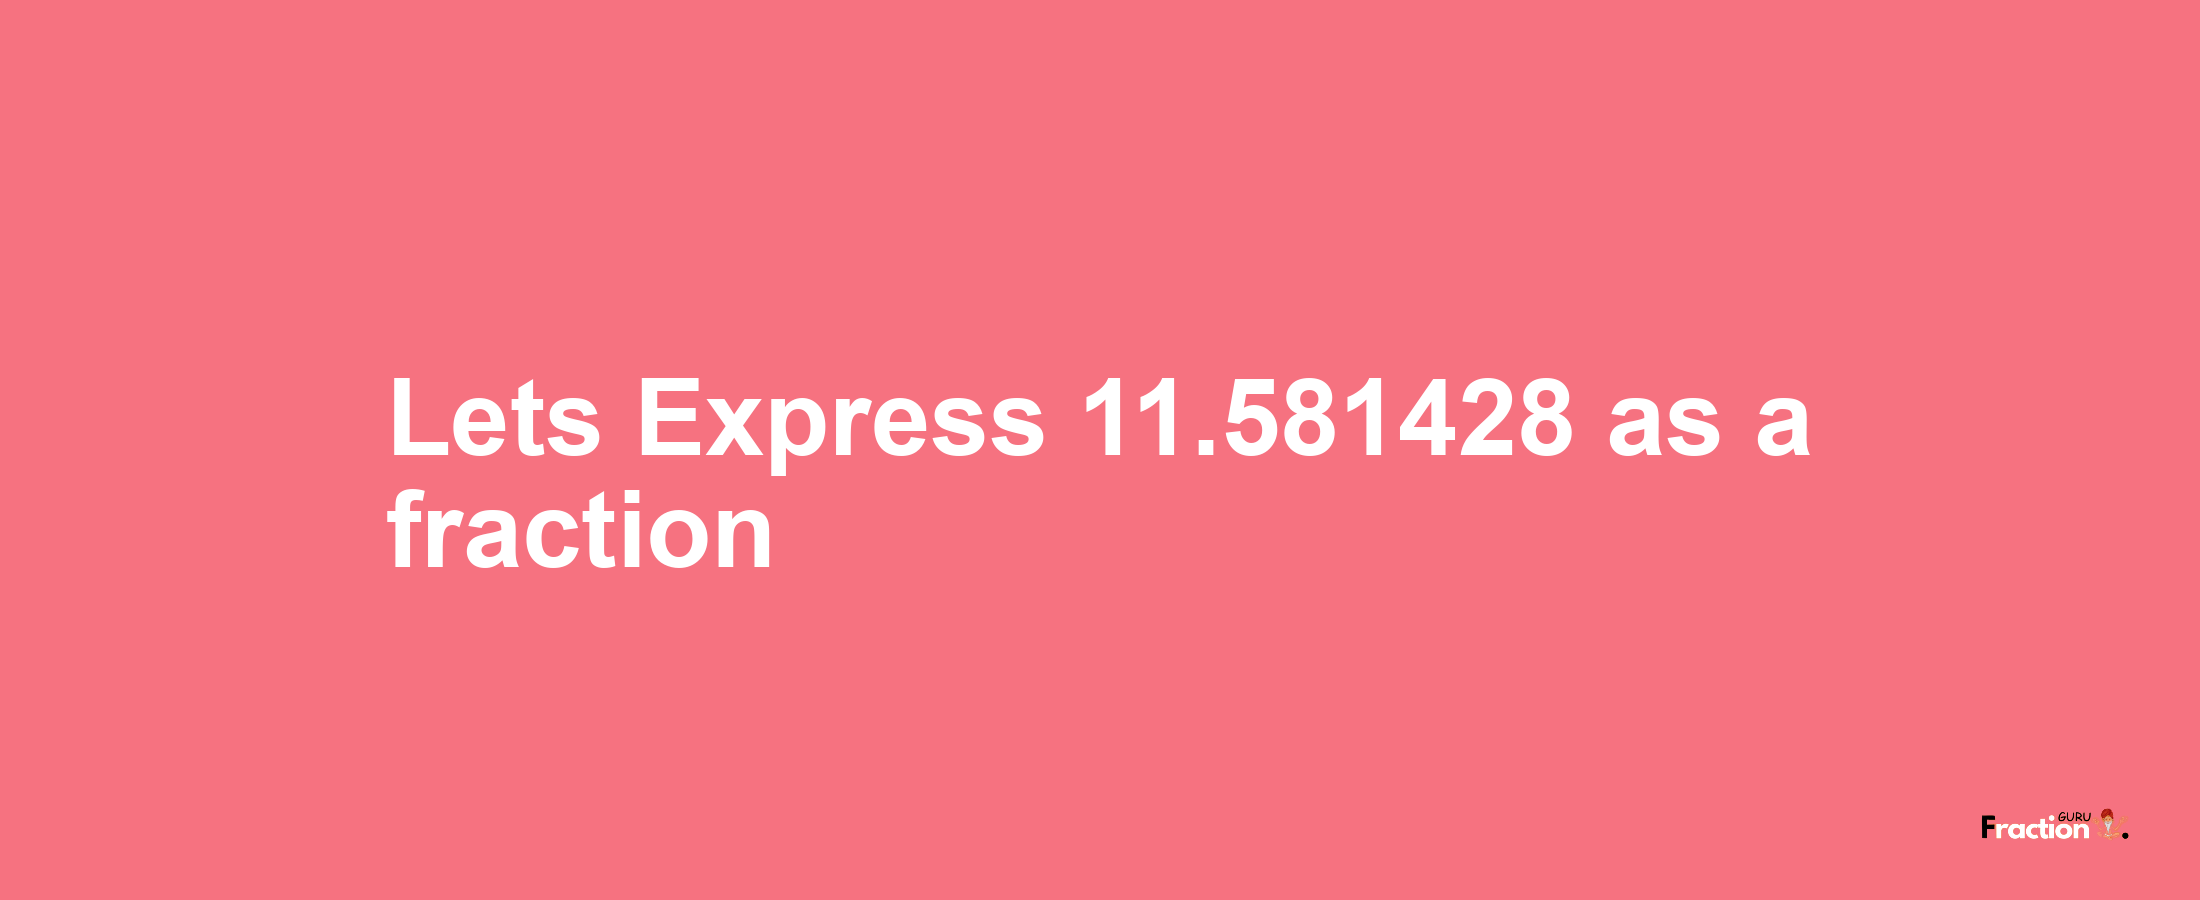 Lets Express 11.581428 as afraction